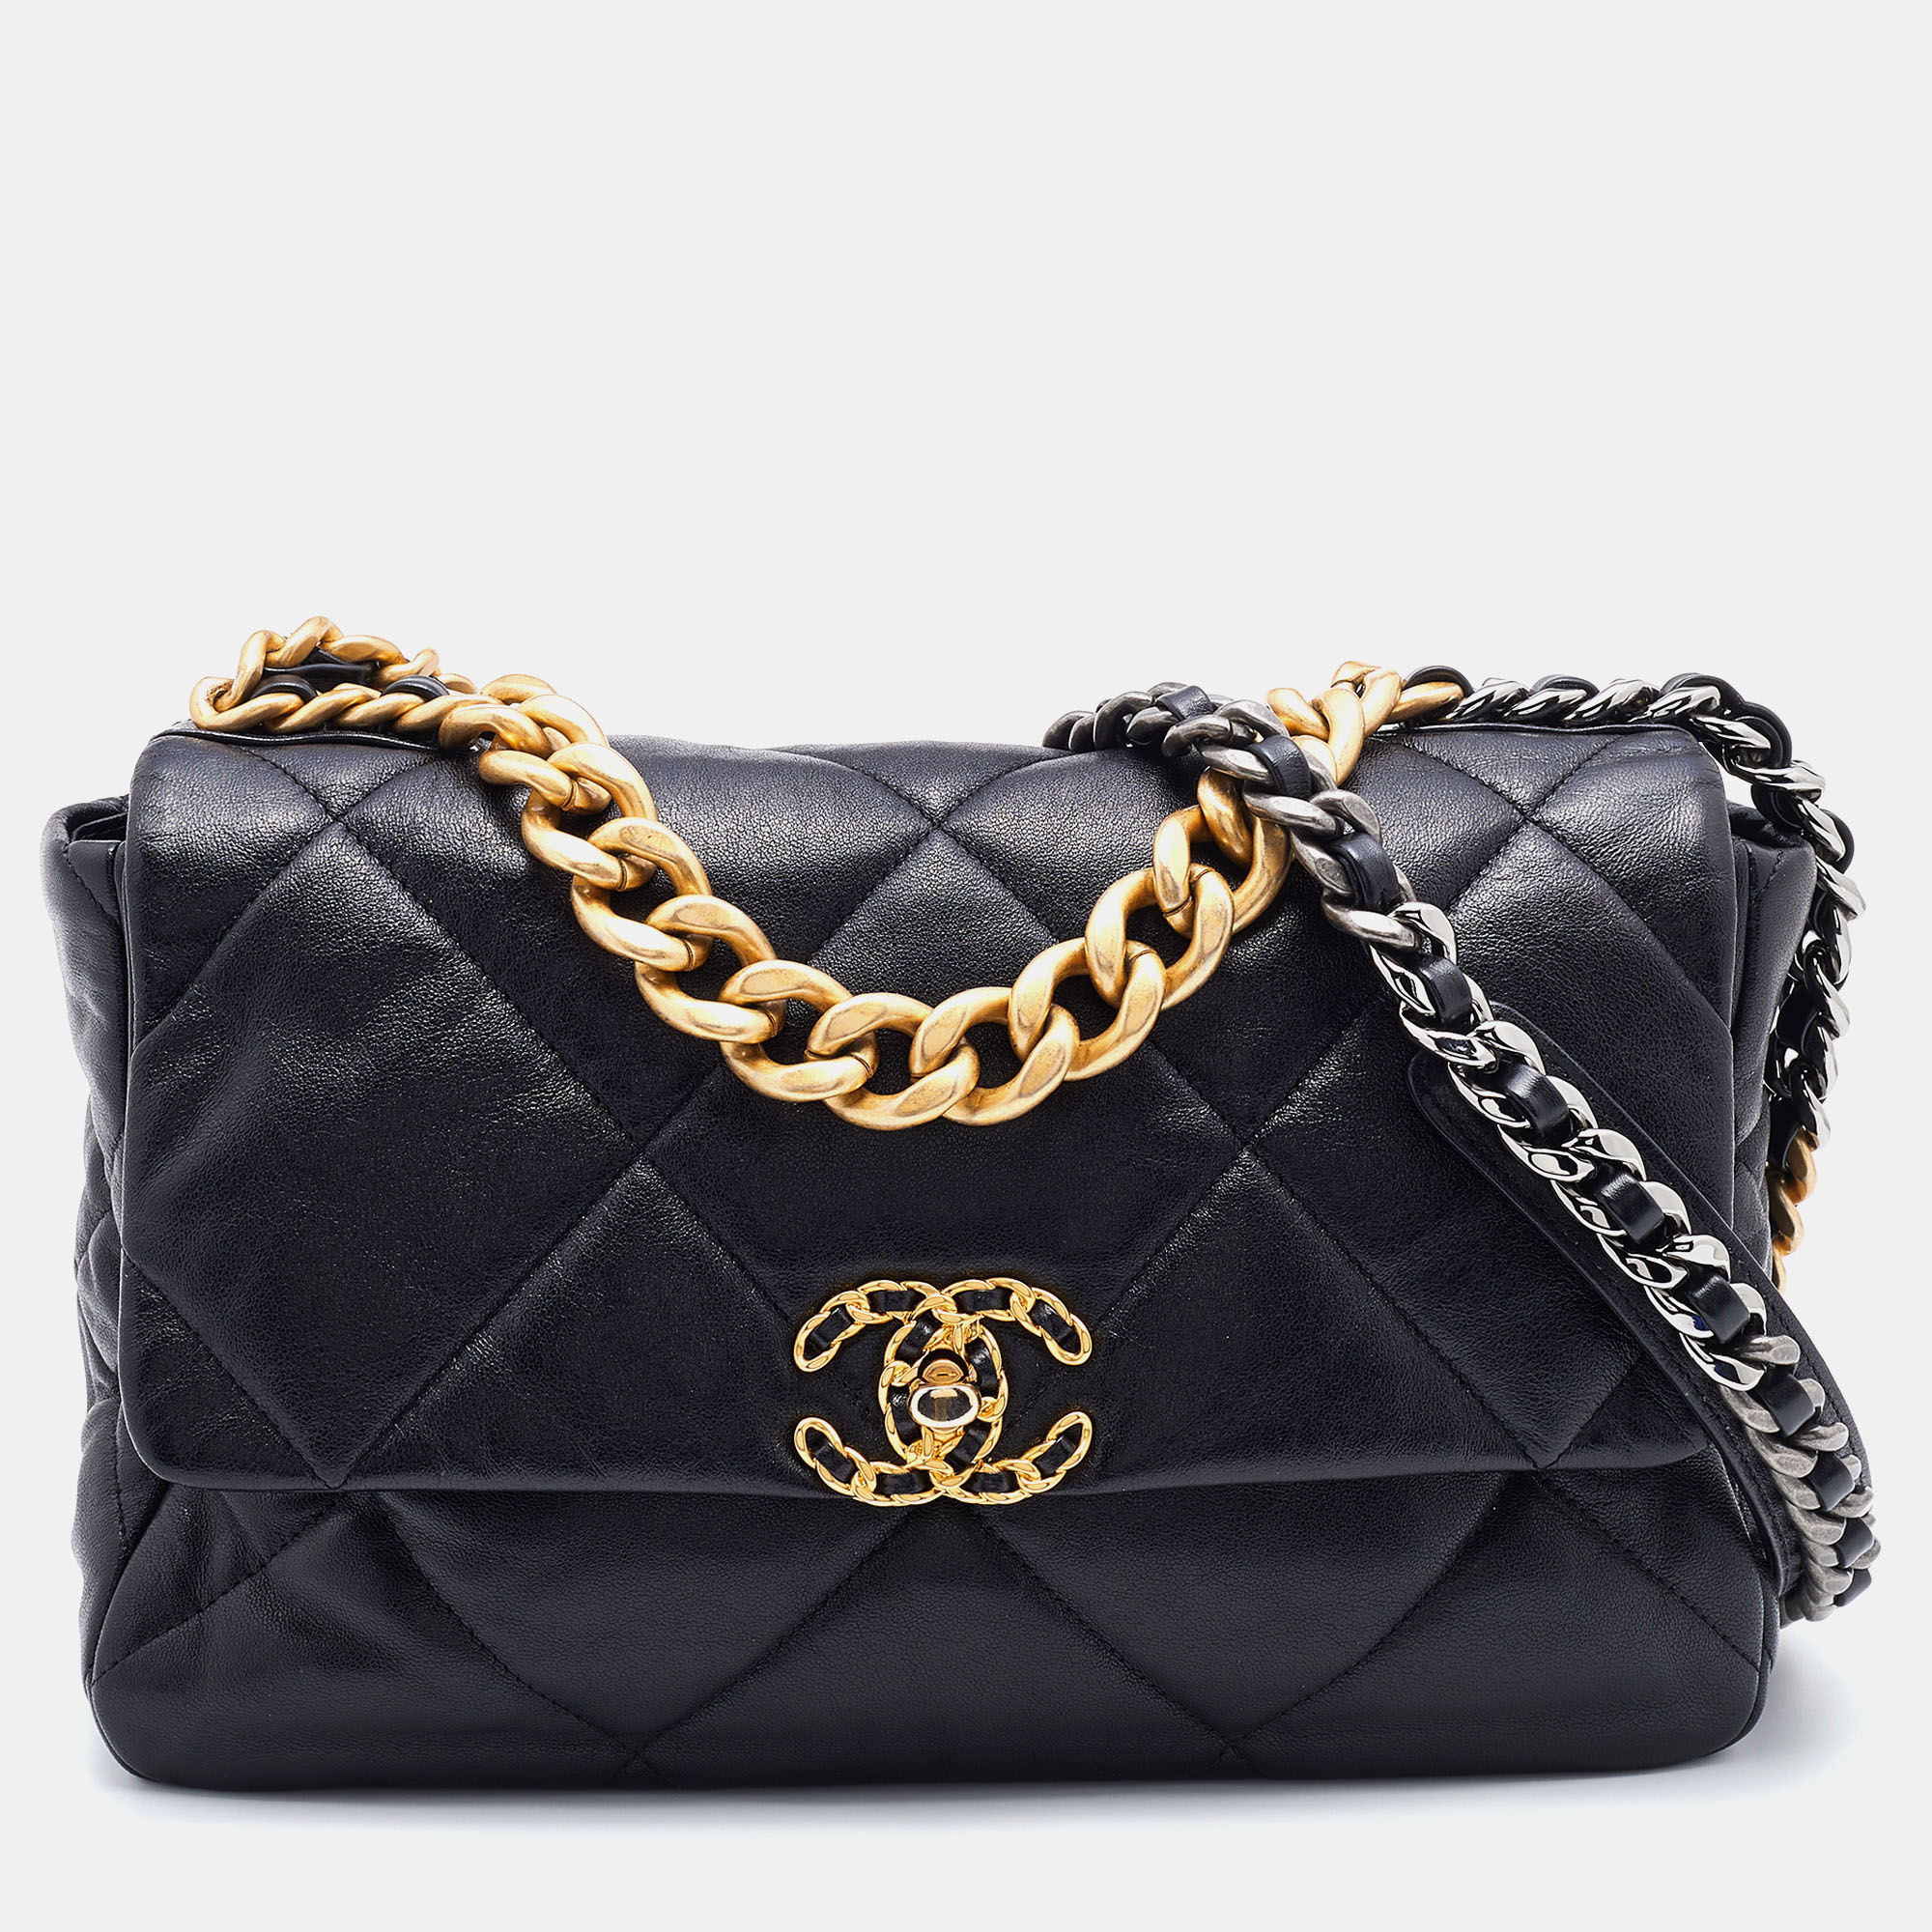 Pre-owned Chanel Black Quilted Leather Cc Chain Link 19 Flap Bag